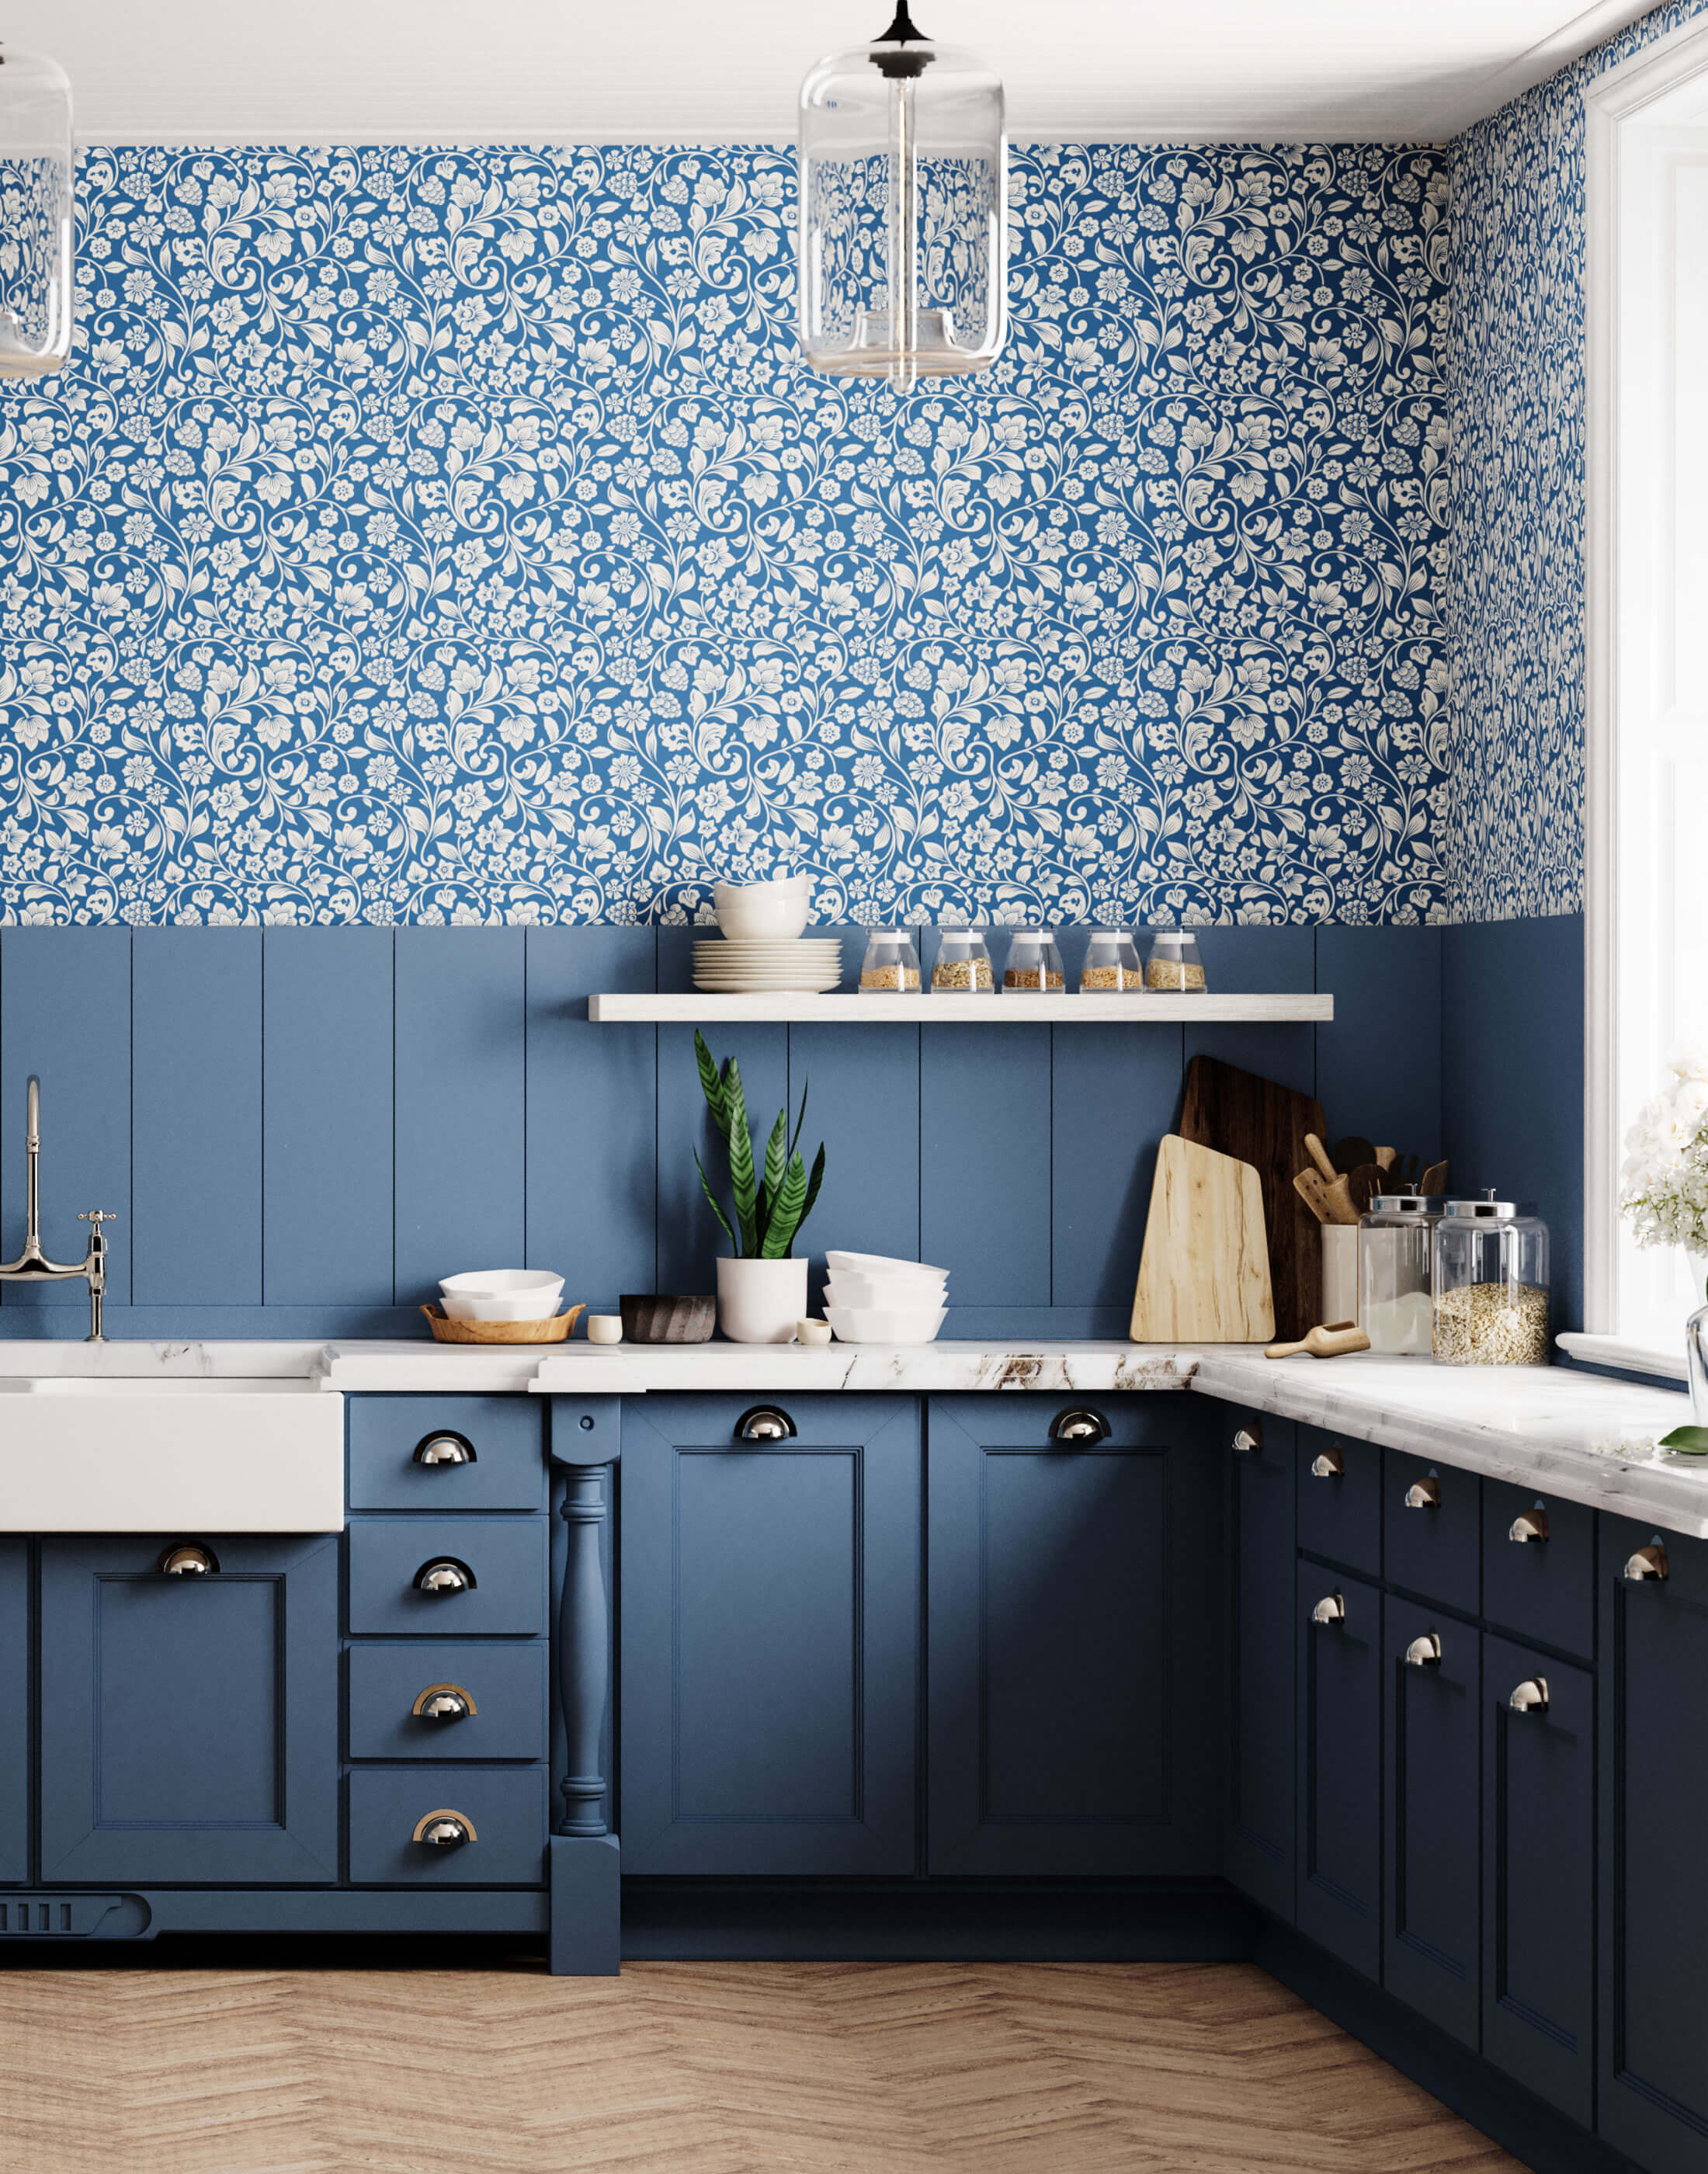 21 Kitchen Wallpaper Ideas to Personalize Your Space